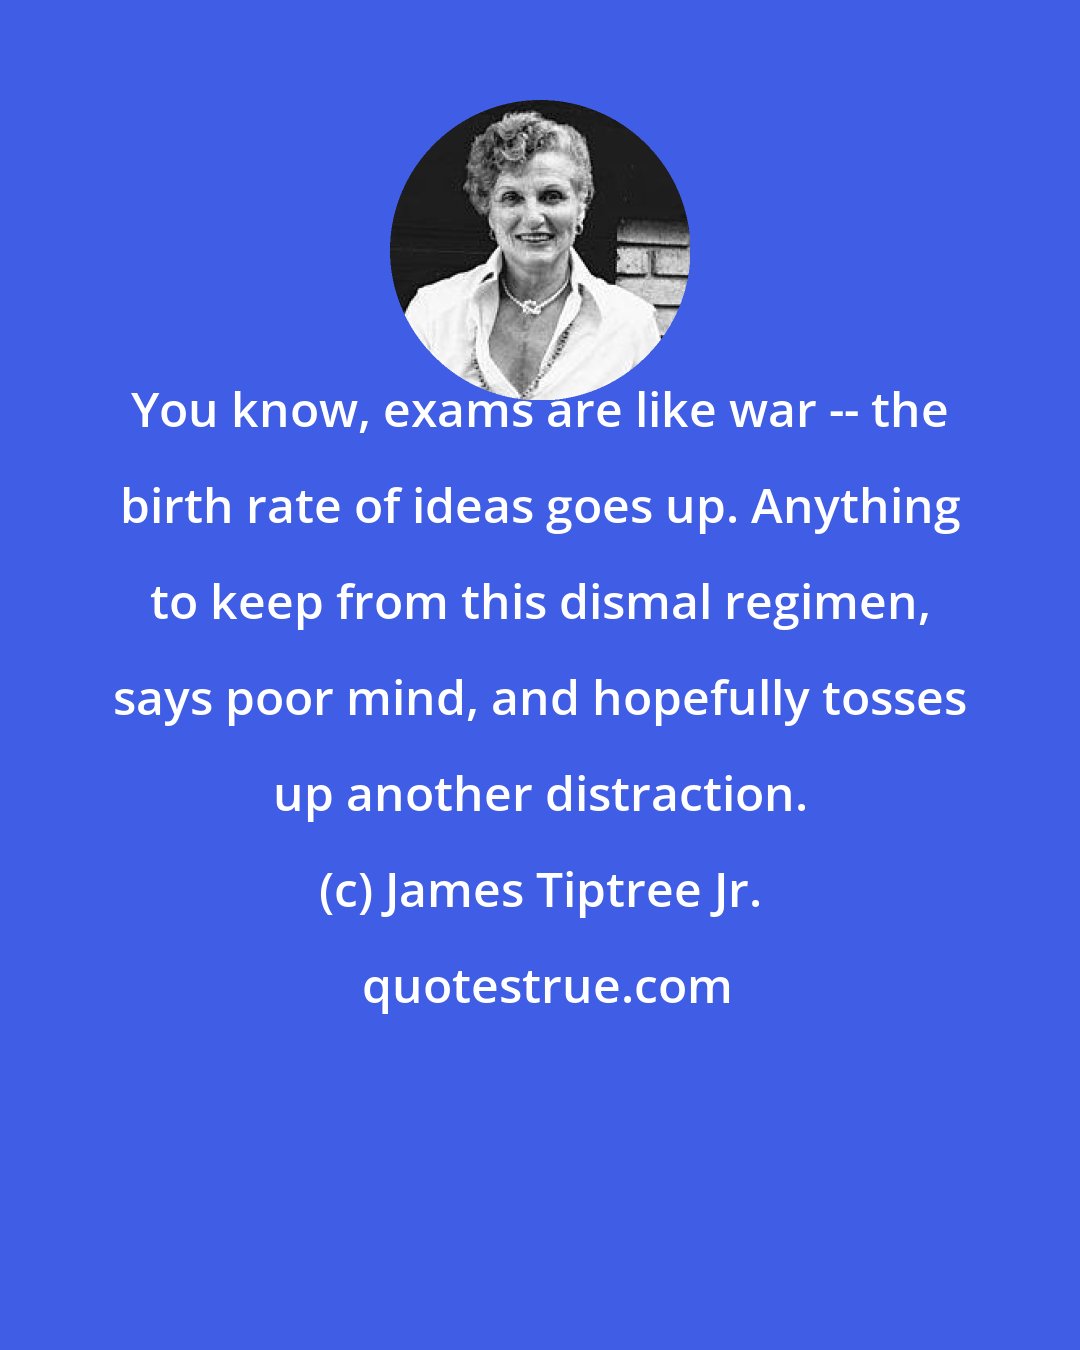 James Tiptree Jr.: You know, exams are like war -- the birth rate of ideas goes up. Anything to keep from this dismal regimen, says poor mind, and hopefully tosses up another distraction.